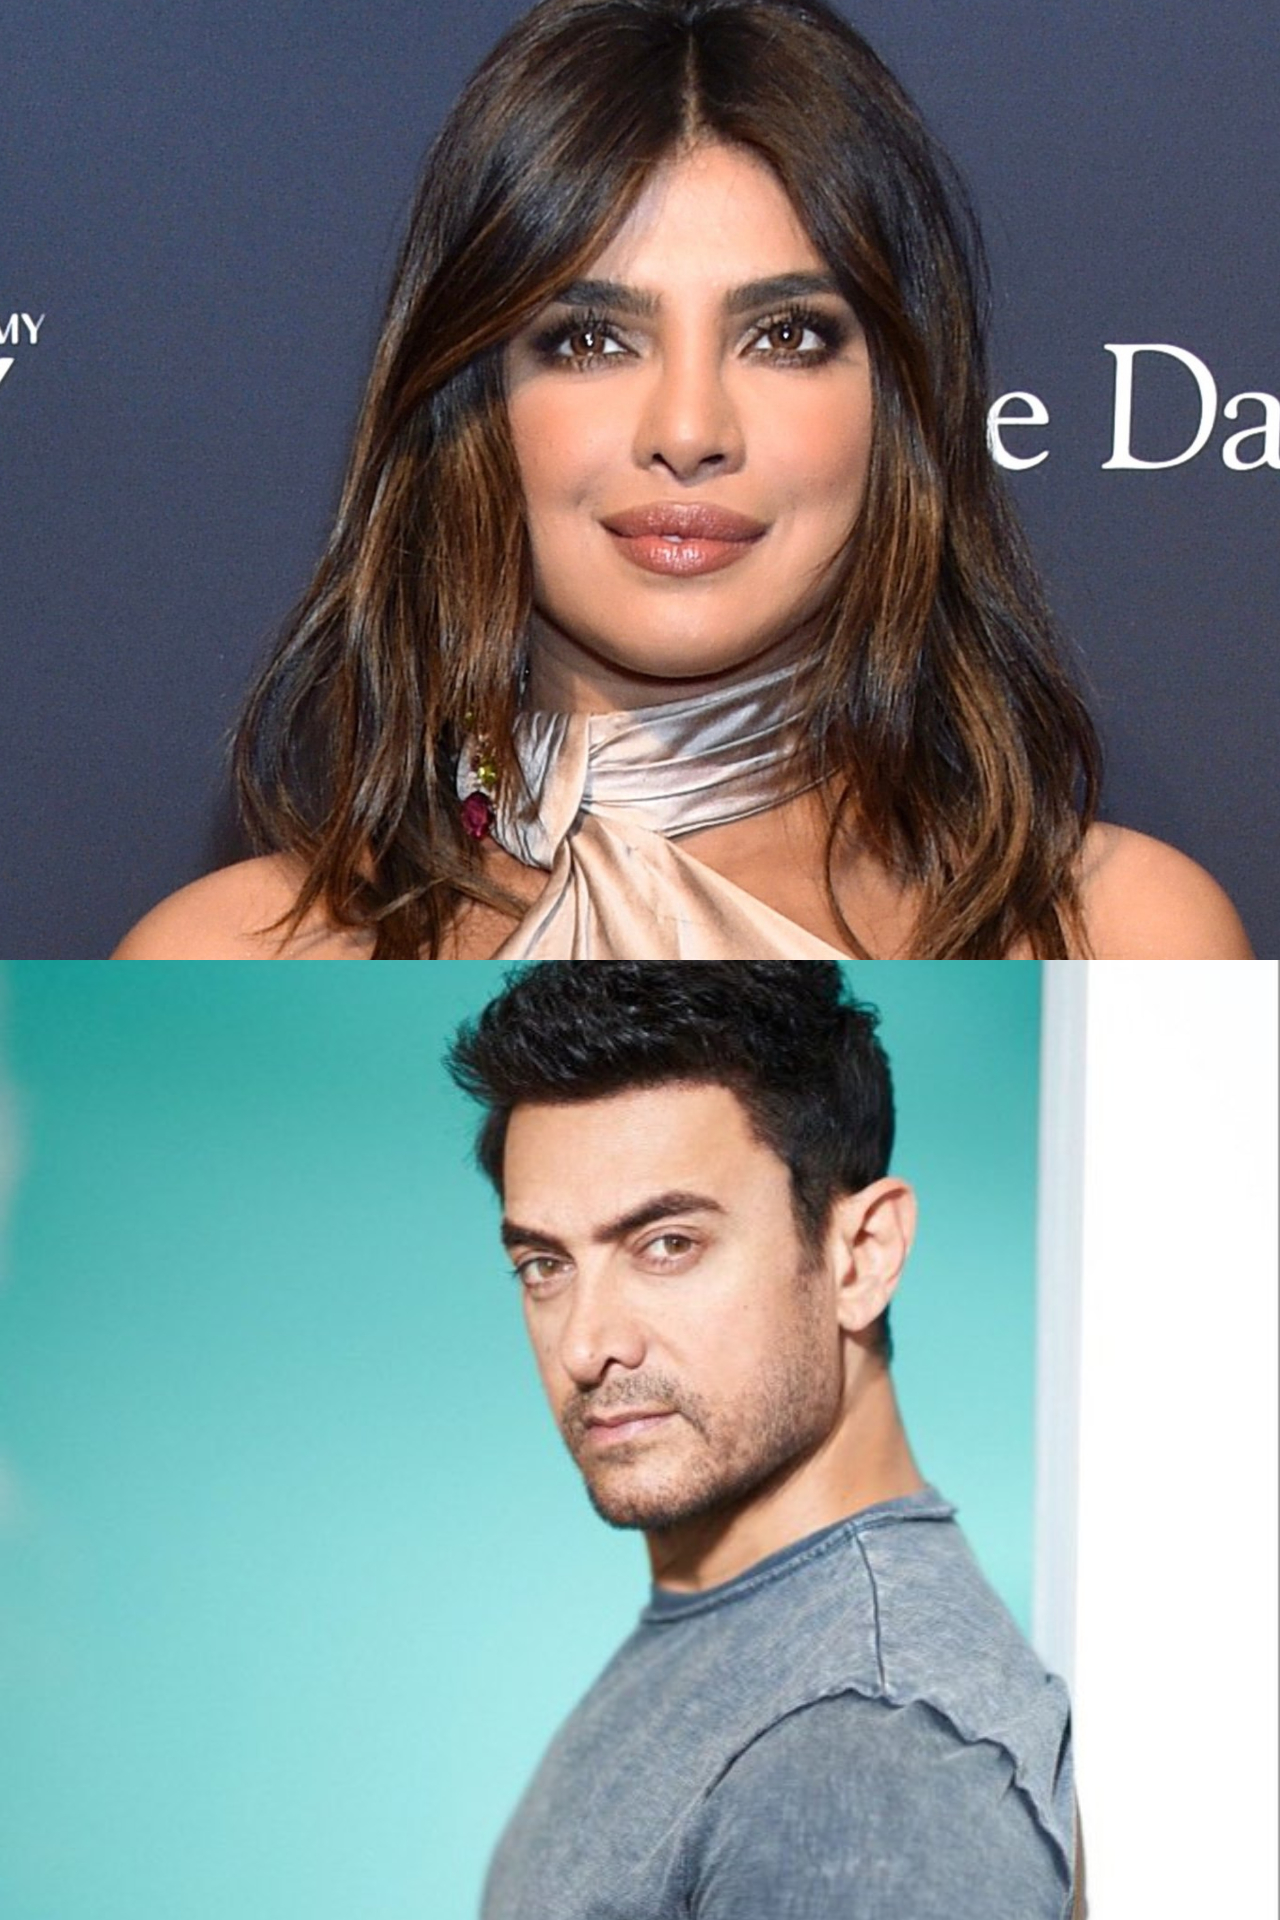 Priyanka Chopra to Aamir Khan, list of celebrities who have joined hands with UNICEF